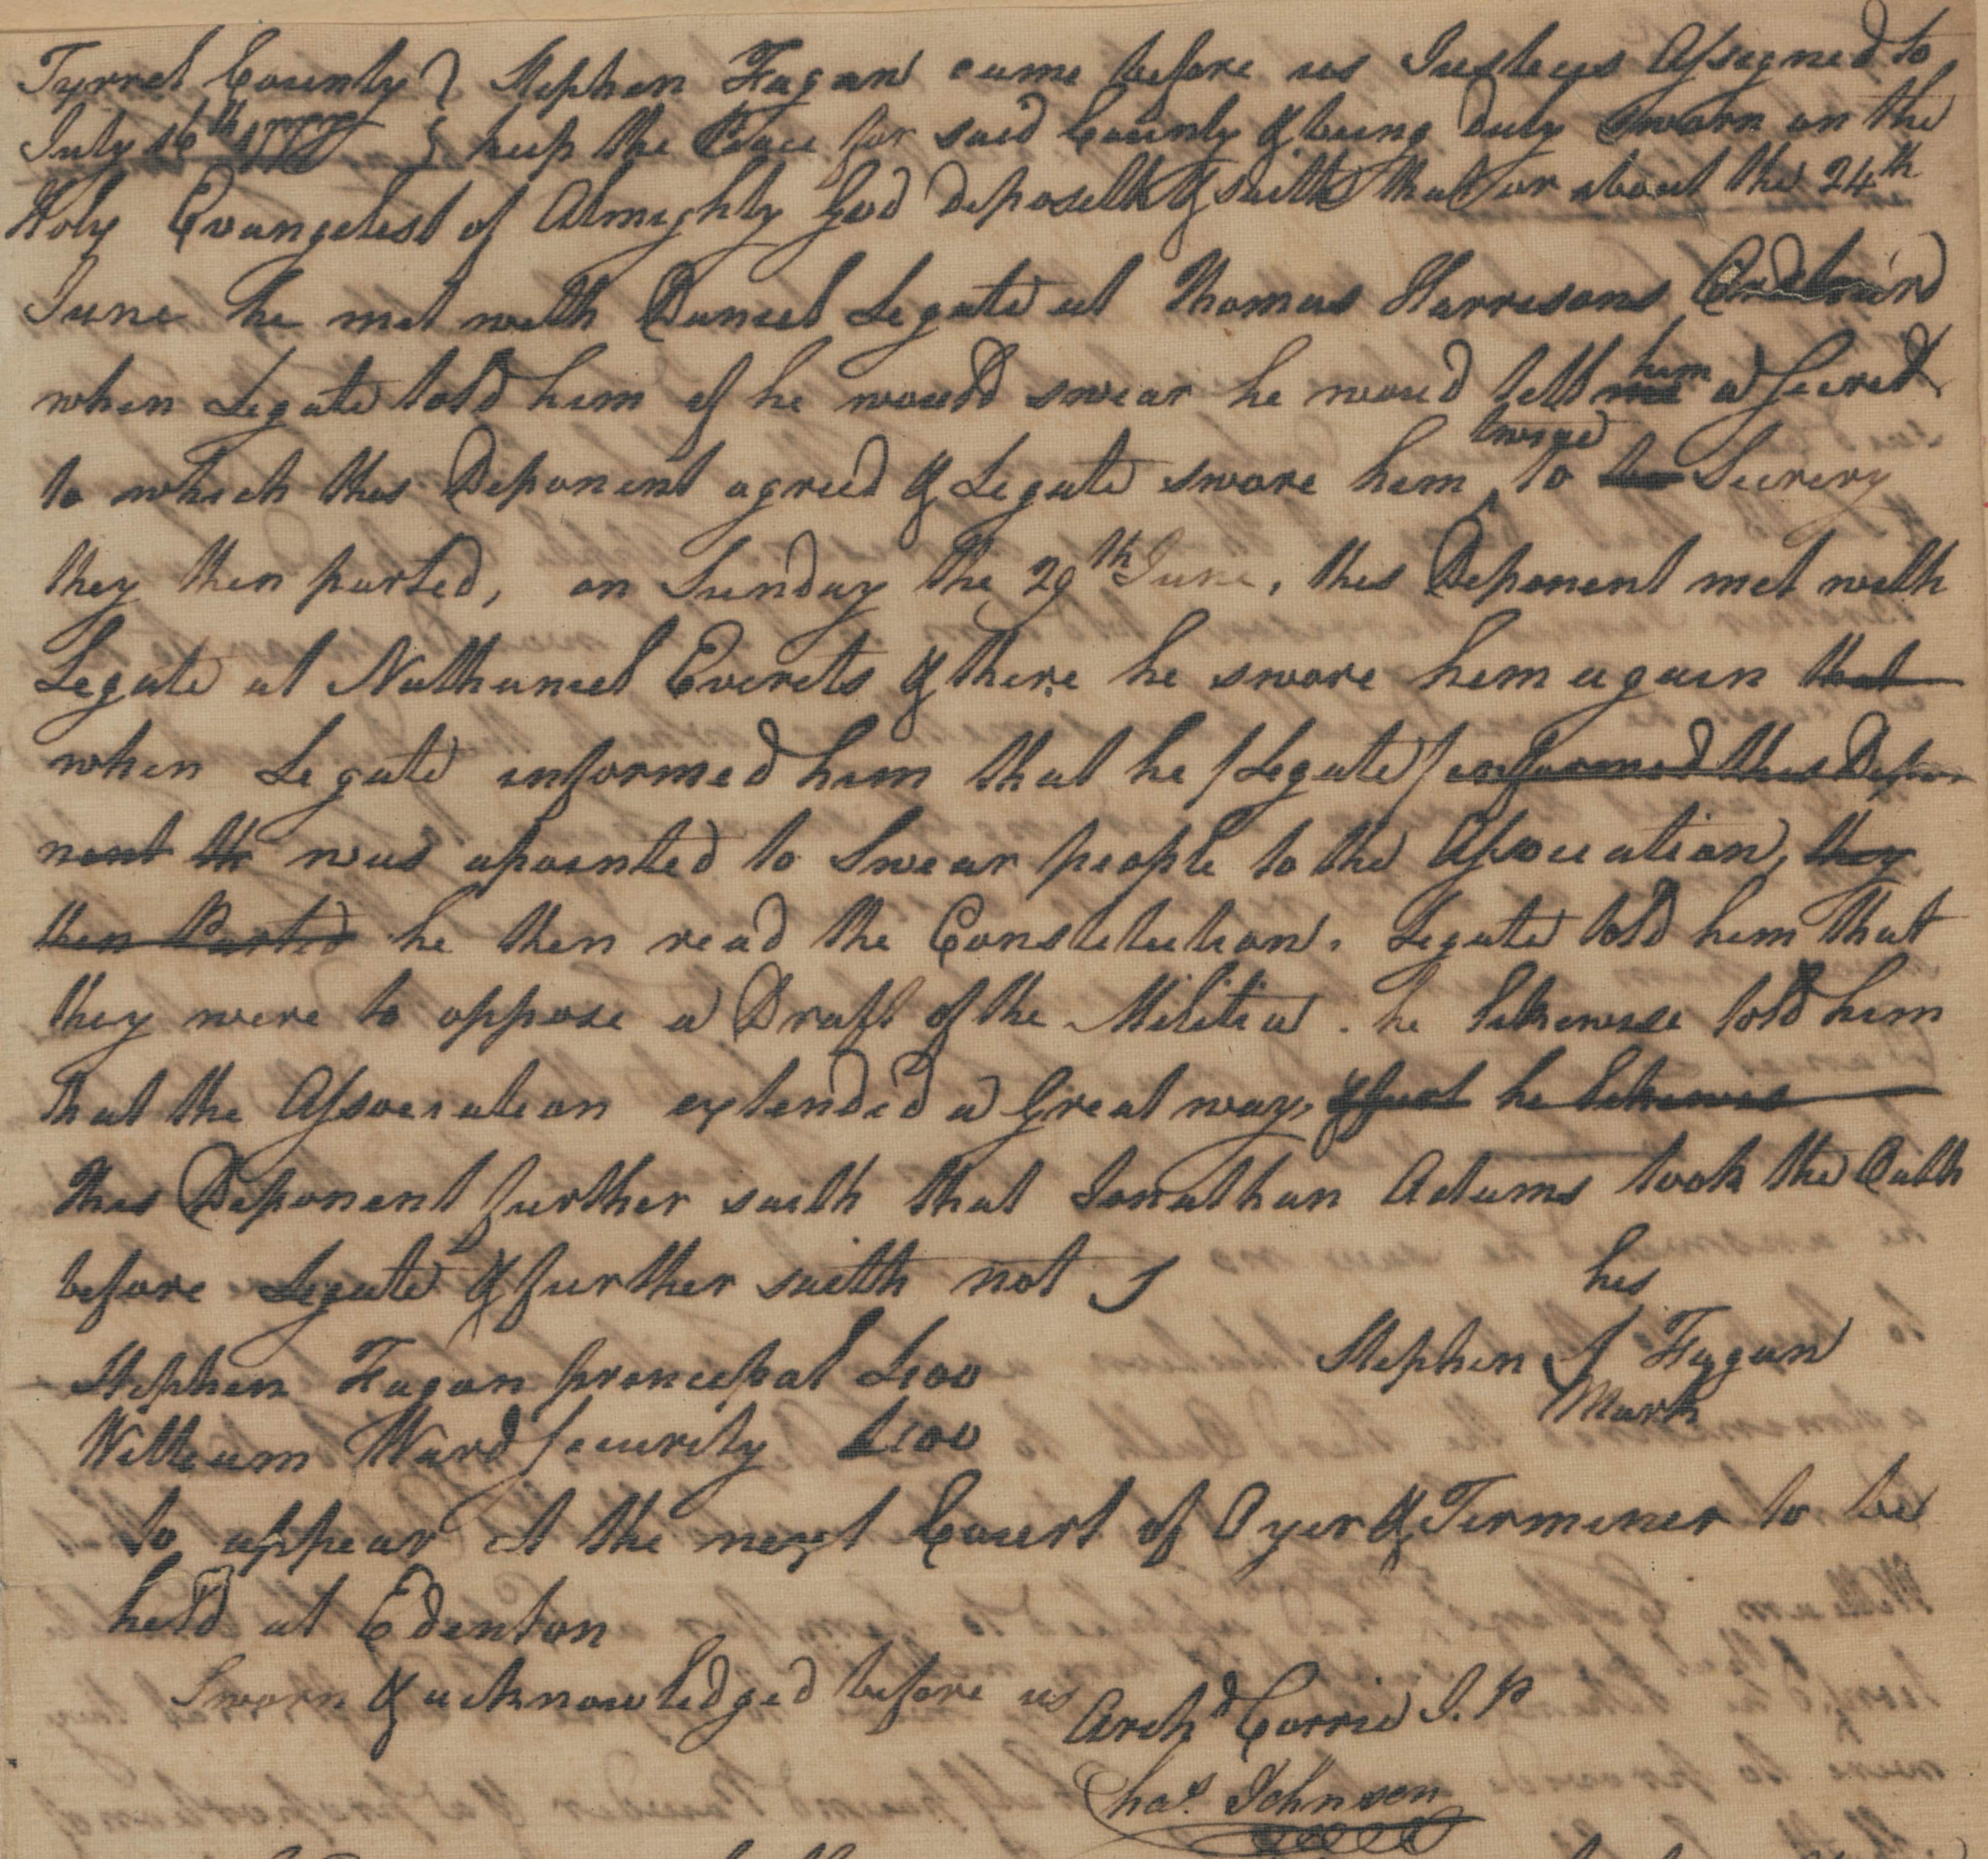 Deposition of Stephen Fagan, 16 July 1777, page 1